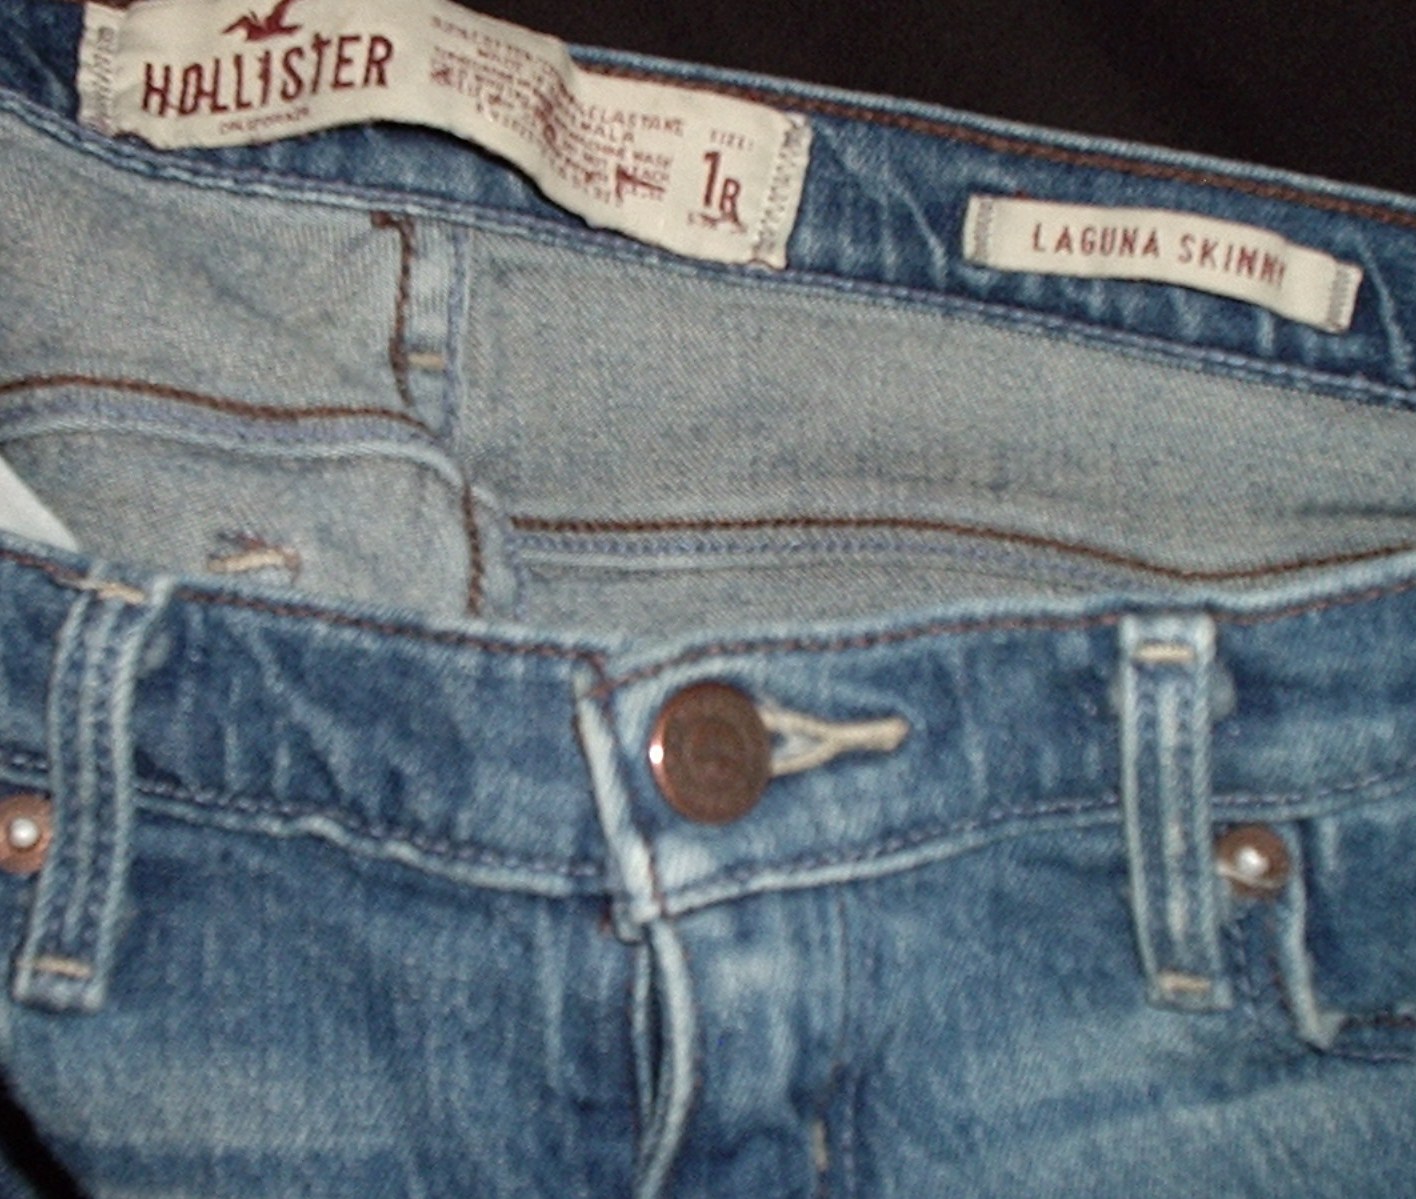 Hollister Size Chart For Jeans